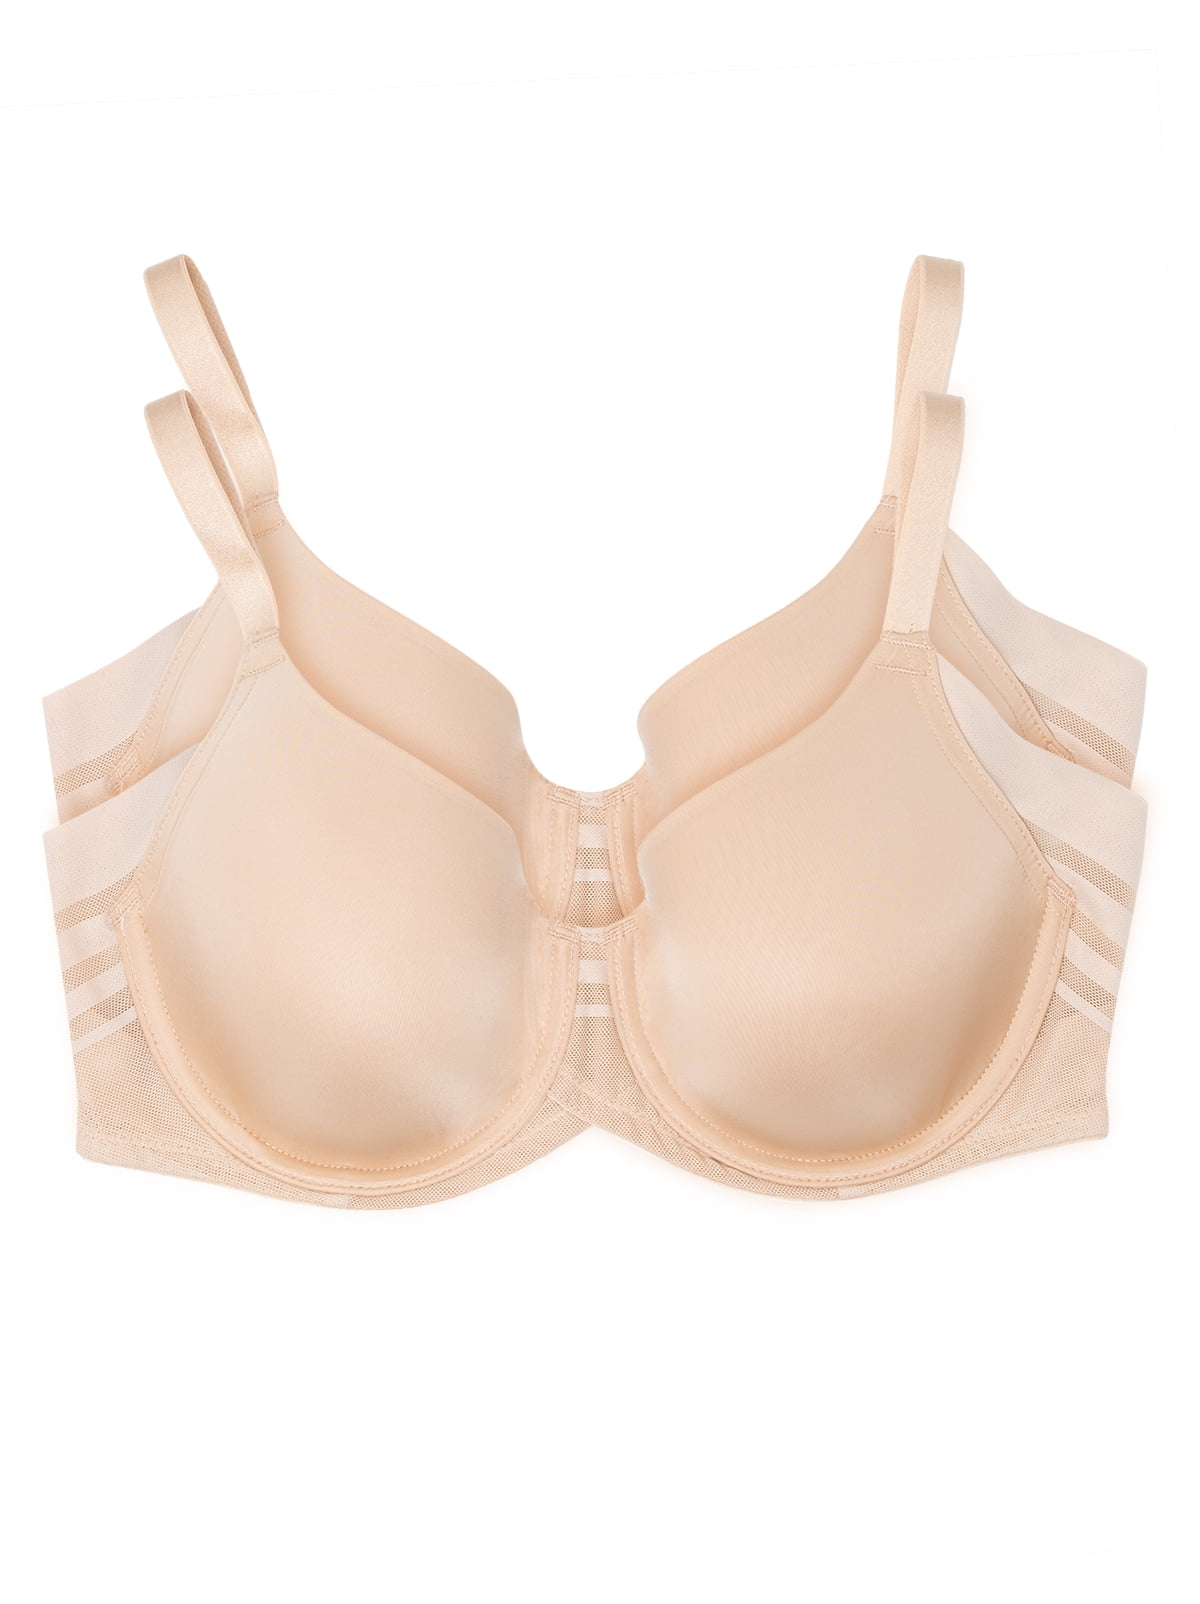 Paramour by Felina Marvelous Side Smoothing T-Shirt Bra